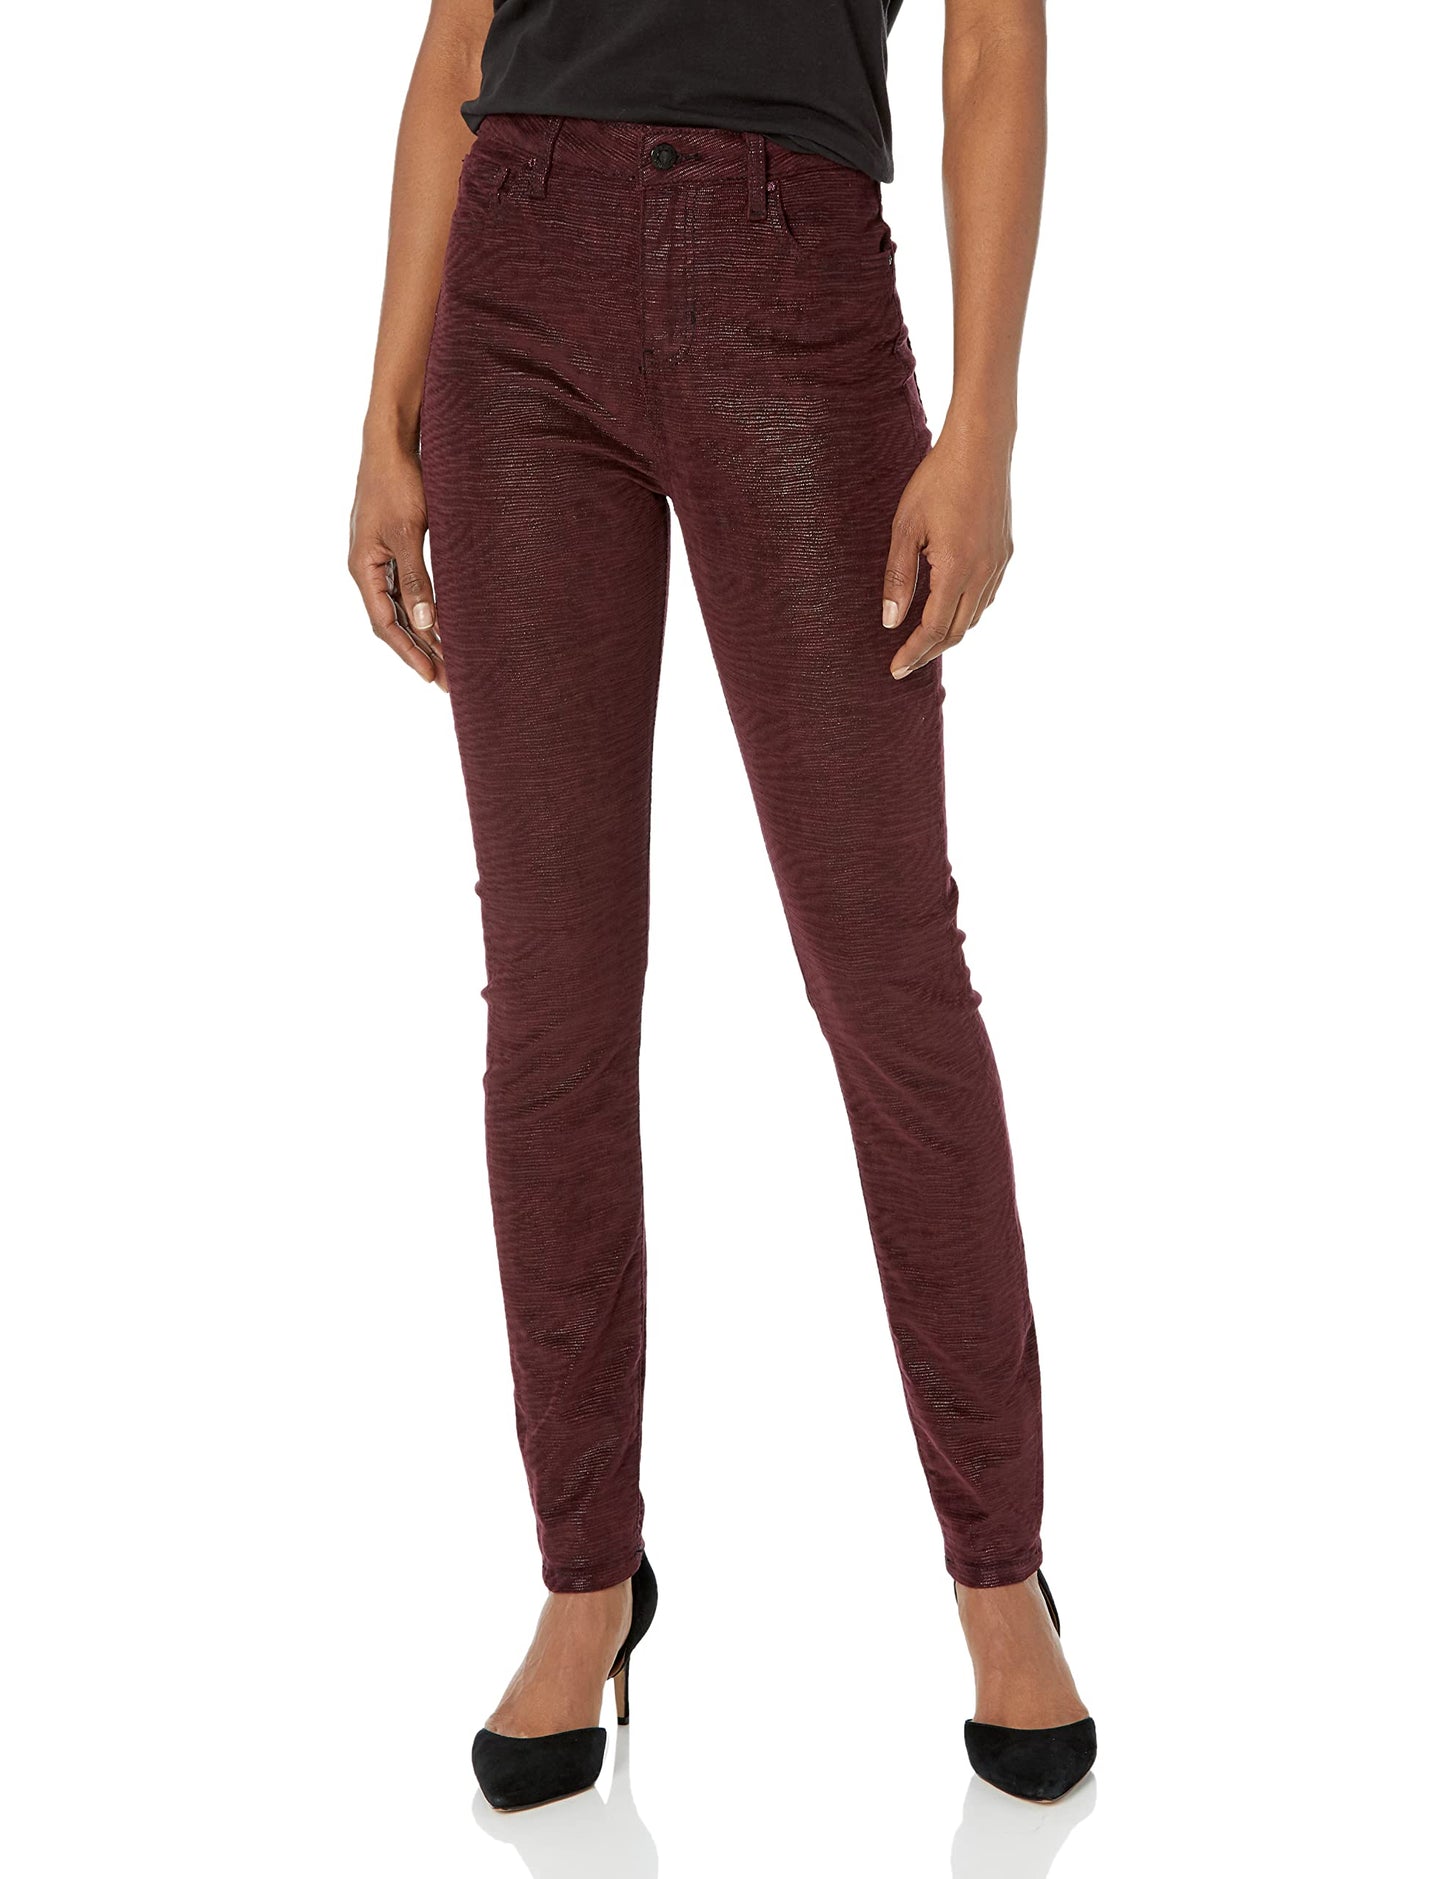 GUESS Women's Stretch High Rise Ultimate Skinny Fit Jean, Called Beast Bordeaux,